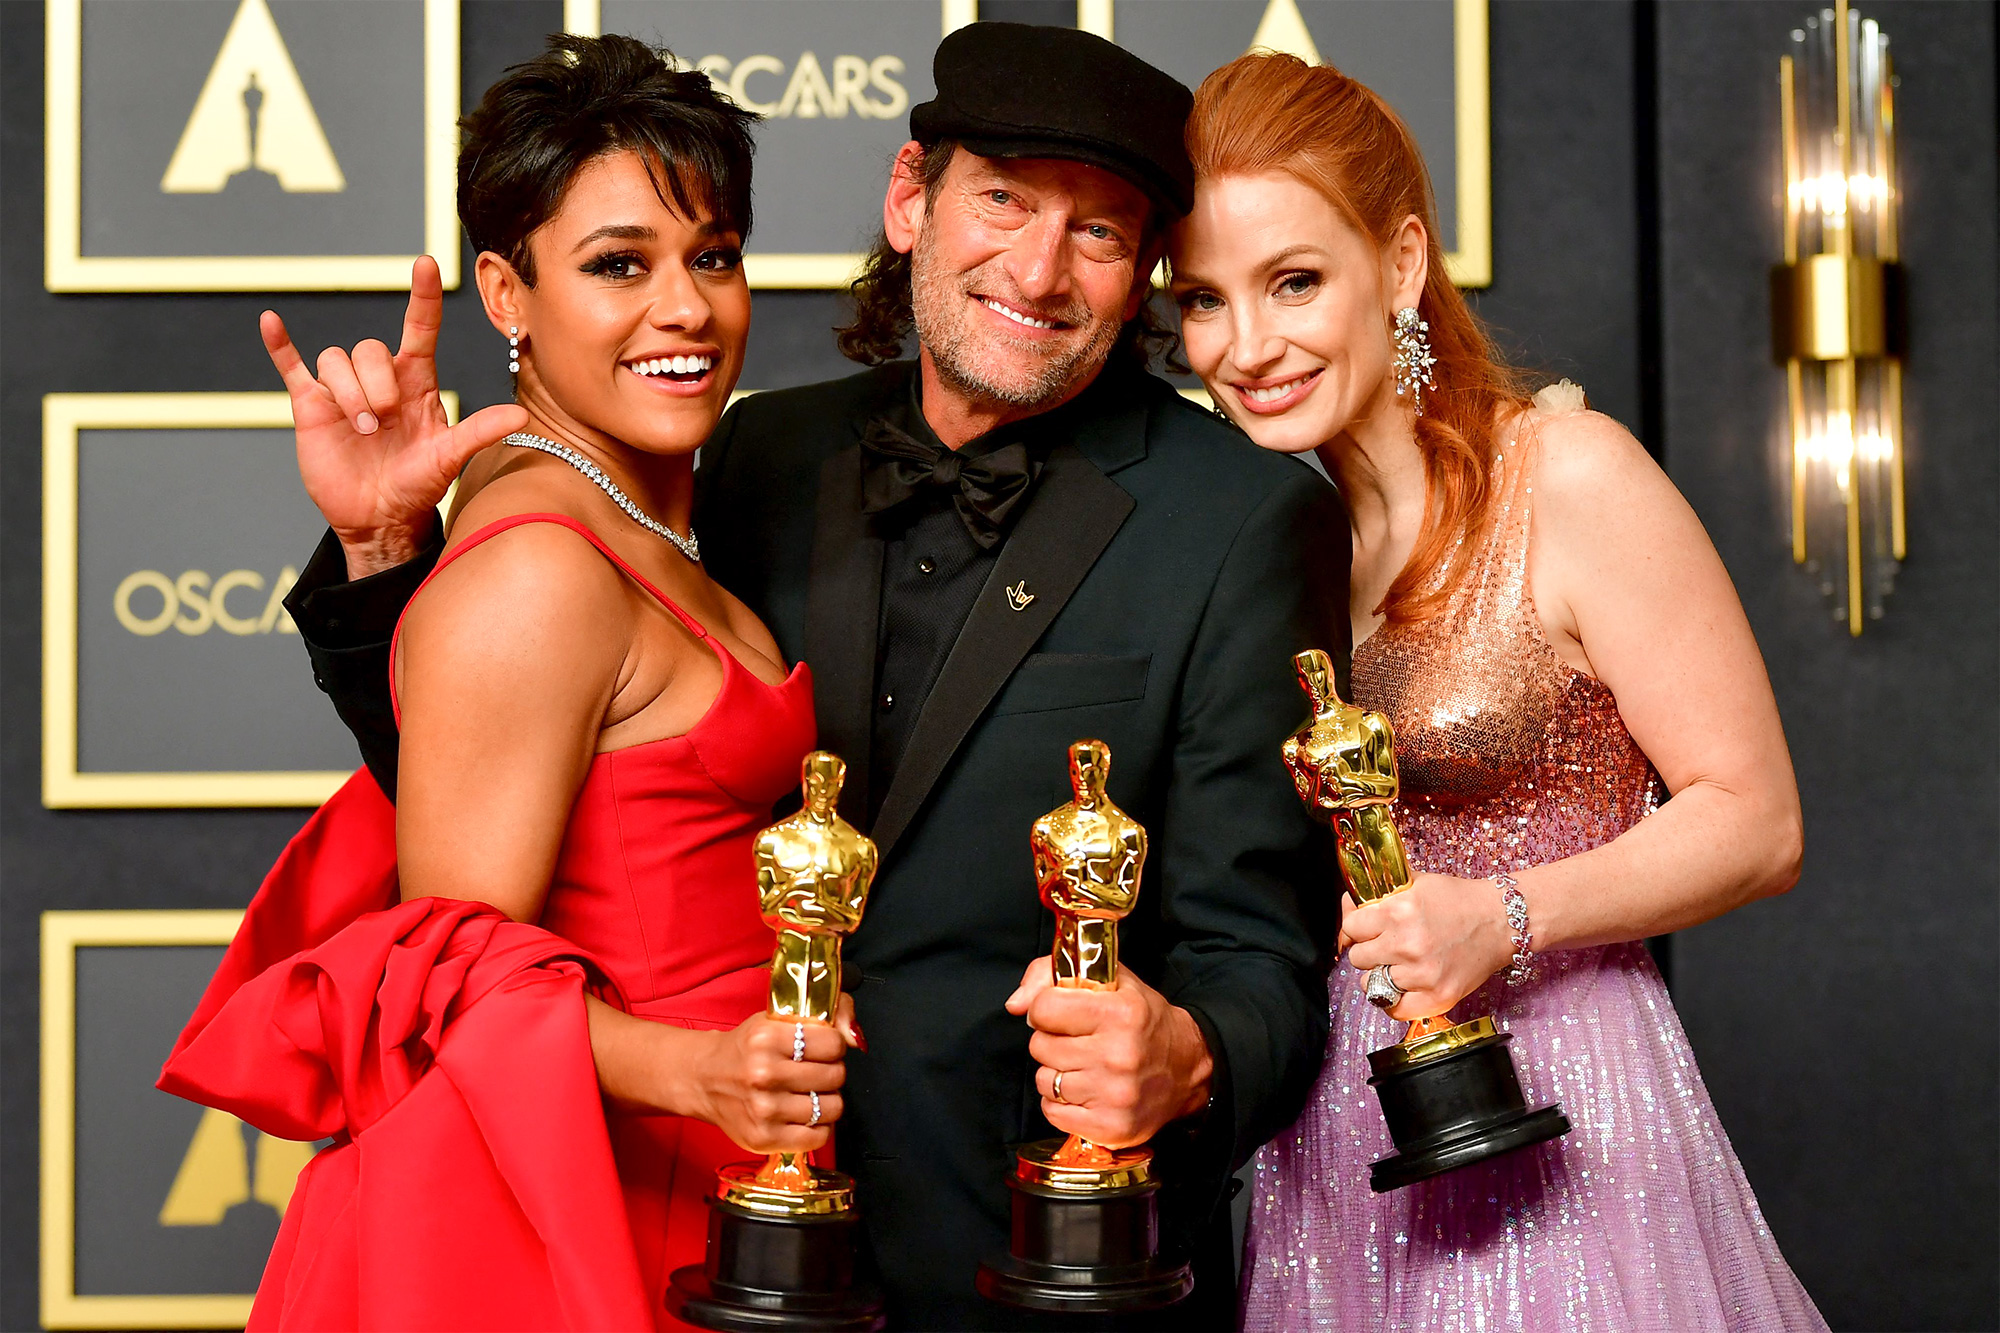 Best Actor in a Supporting Role Troy Kotsur (C), Best Actress in a Supporting Role Ariana DeBose (L) and Best Actress in a Leading Role Jessica Chastain (R) pose together during the 94th Oscars at the Dolby Theatre in Hollywood, California on March 27, 2022. in the press room during the 94th Oscars at the Dolby Theatre in Hollywood, California on March 27, 2022